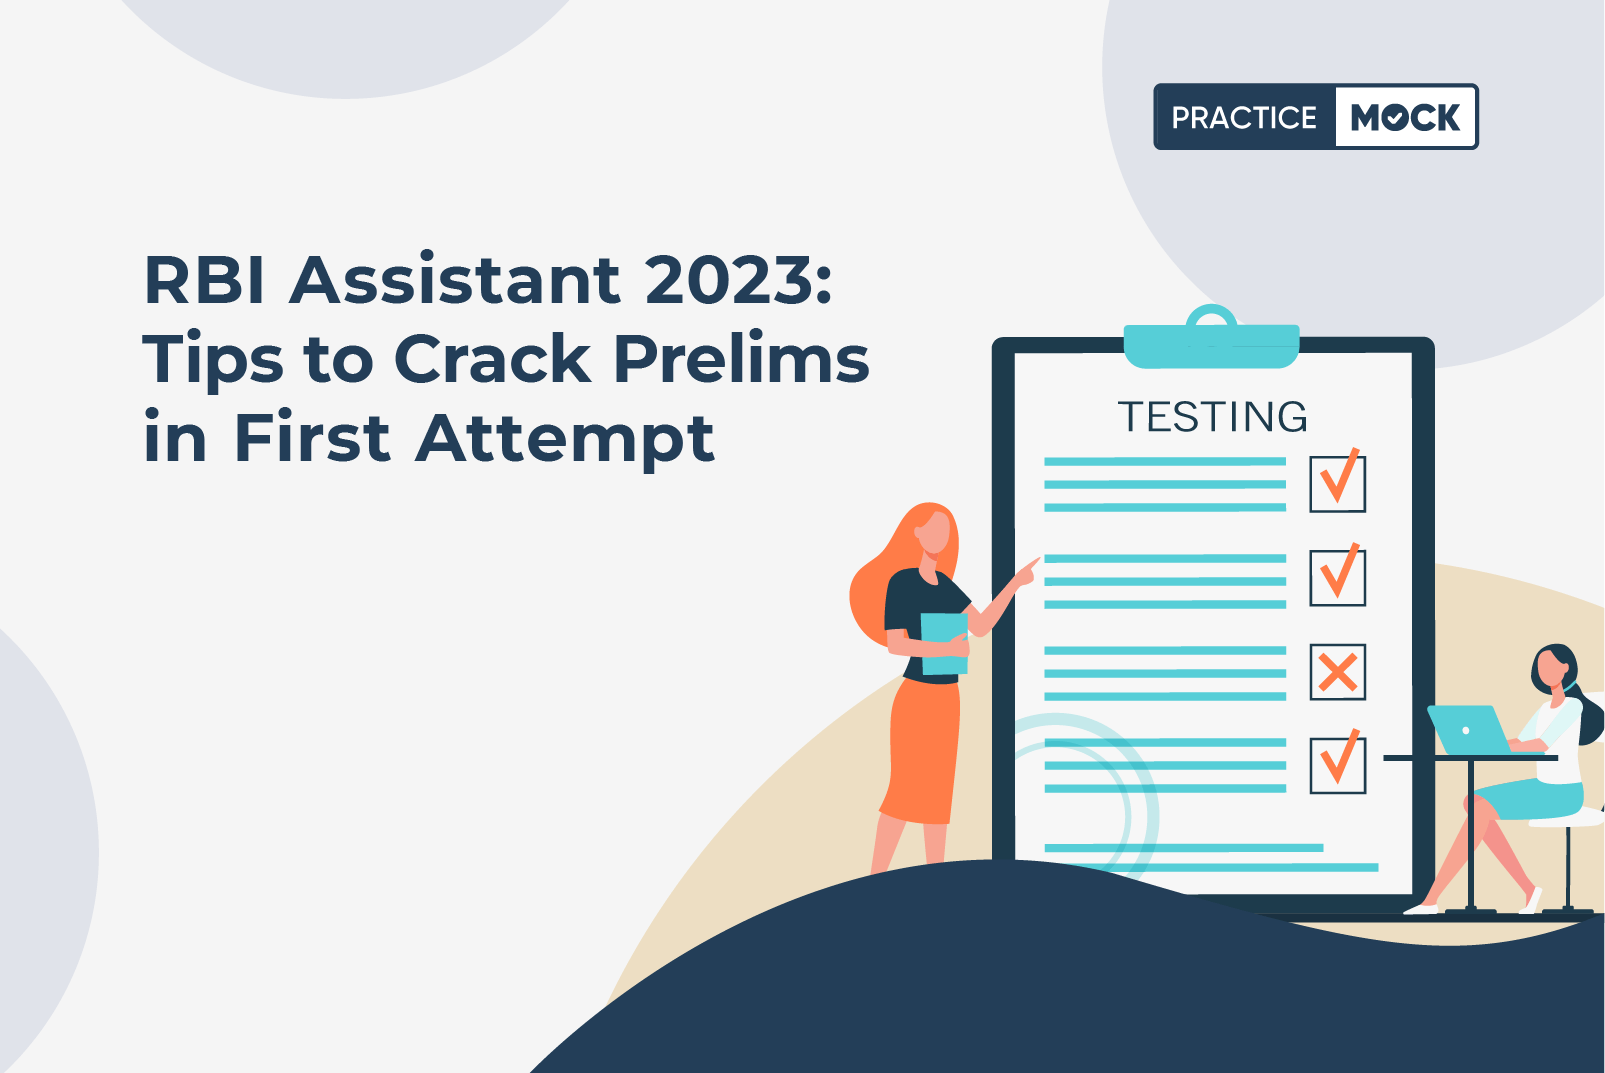 RBI Assistant 2023 Tips to Crack Prelims in First Attempt